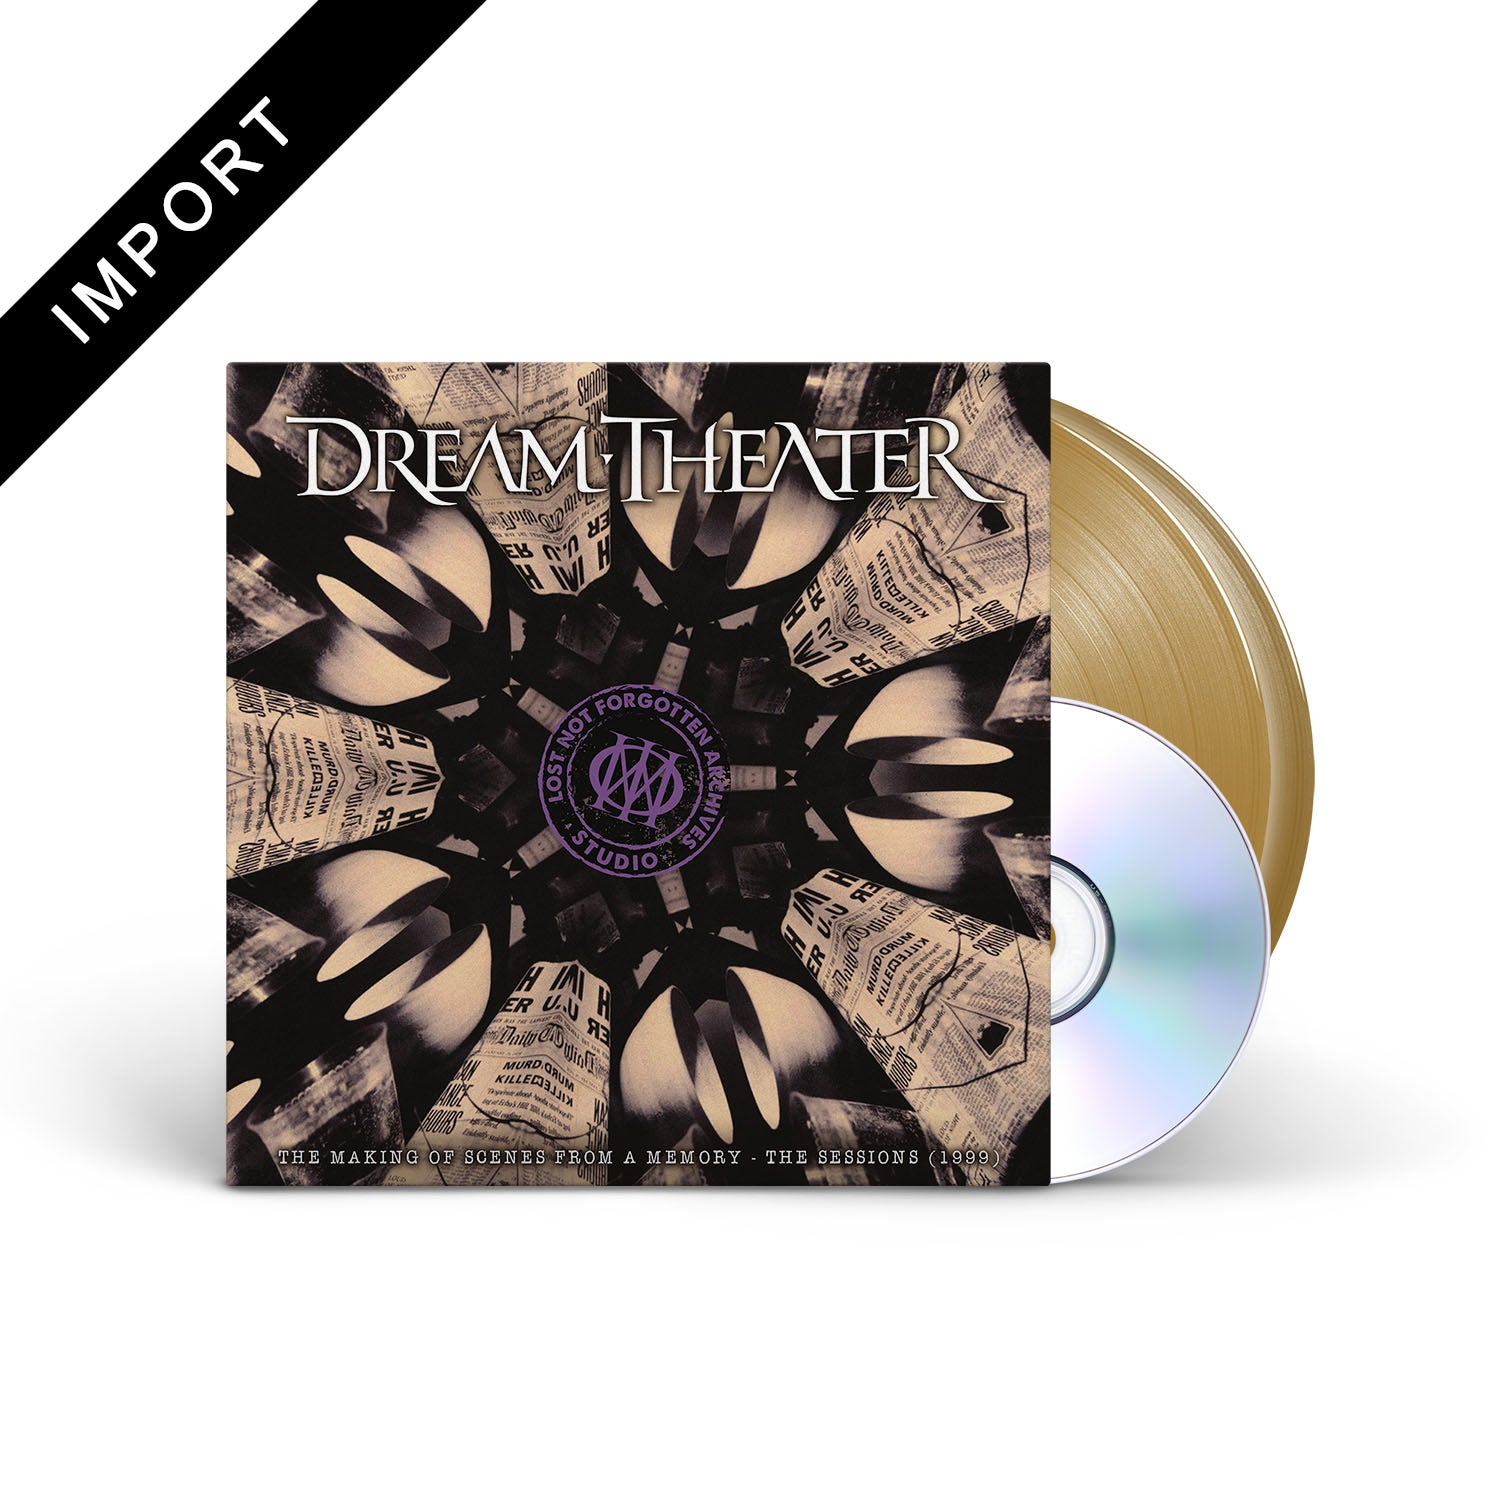 DREAM THEATER - Lost Not Forgotten Archives: The Making Of Scenes From A Memory - The Sessions (1999) - Gold 2xLP + CD